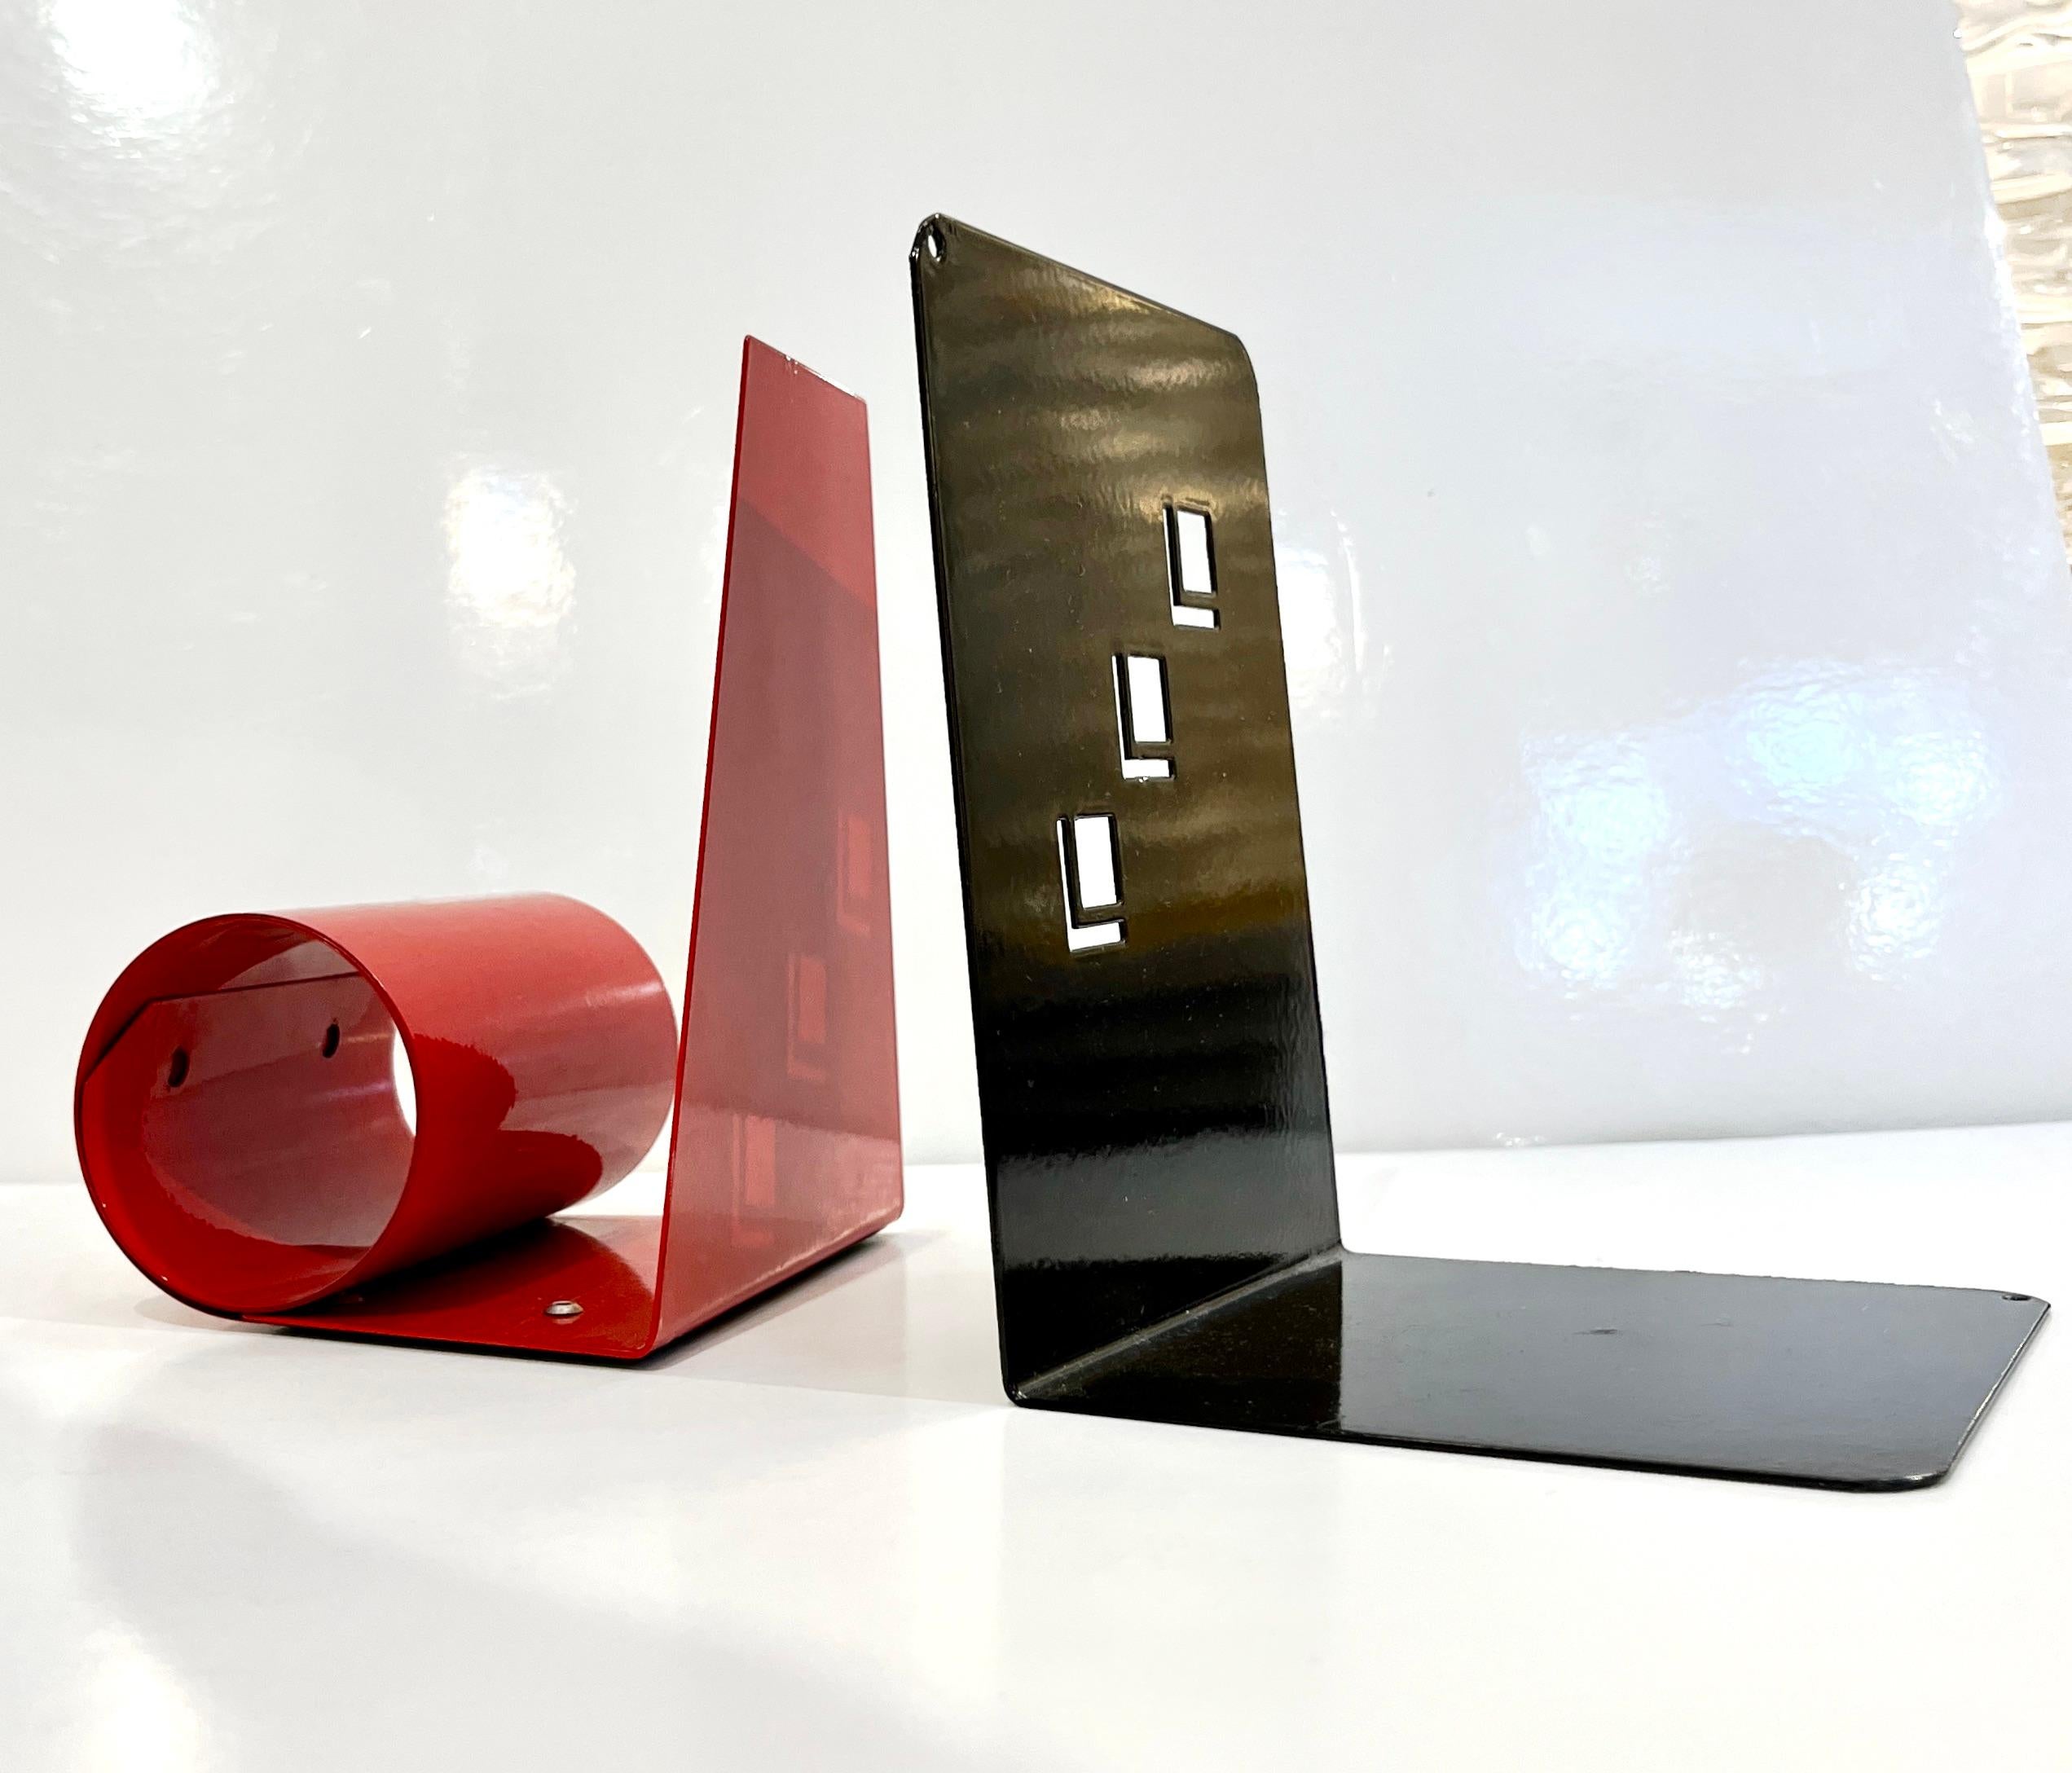 Late 20th Century 1970s Italian Vintage Red & Black Lacquered Metal Post-Modern Geometric Bookends For Sale